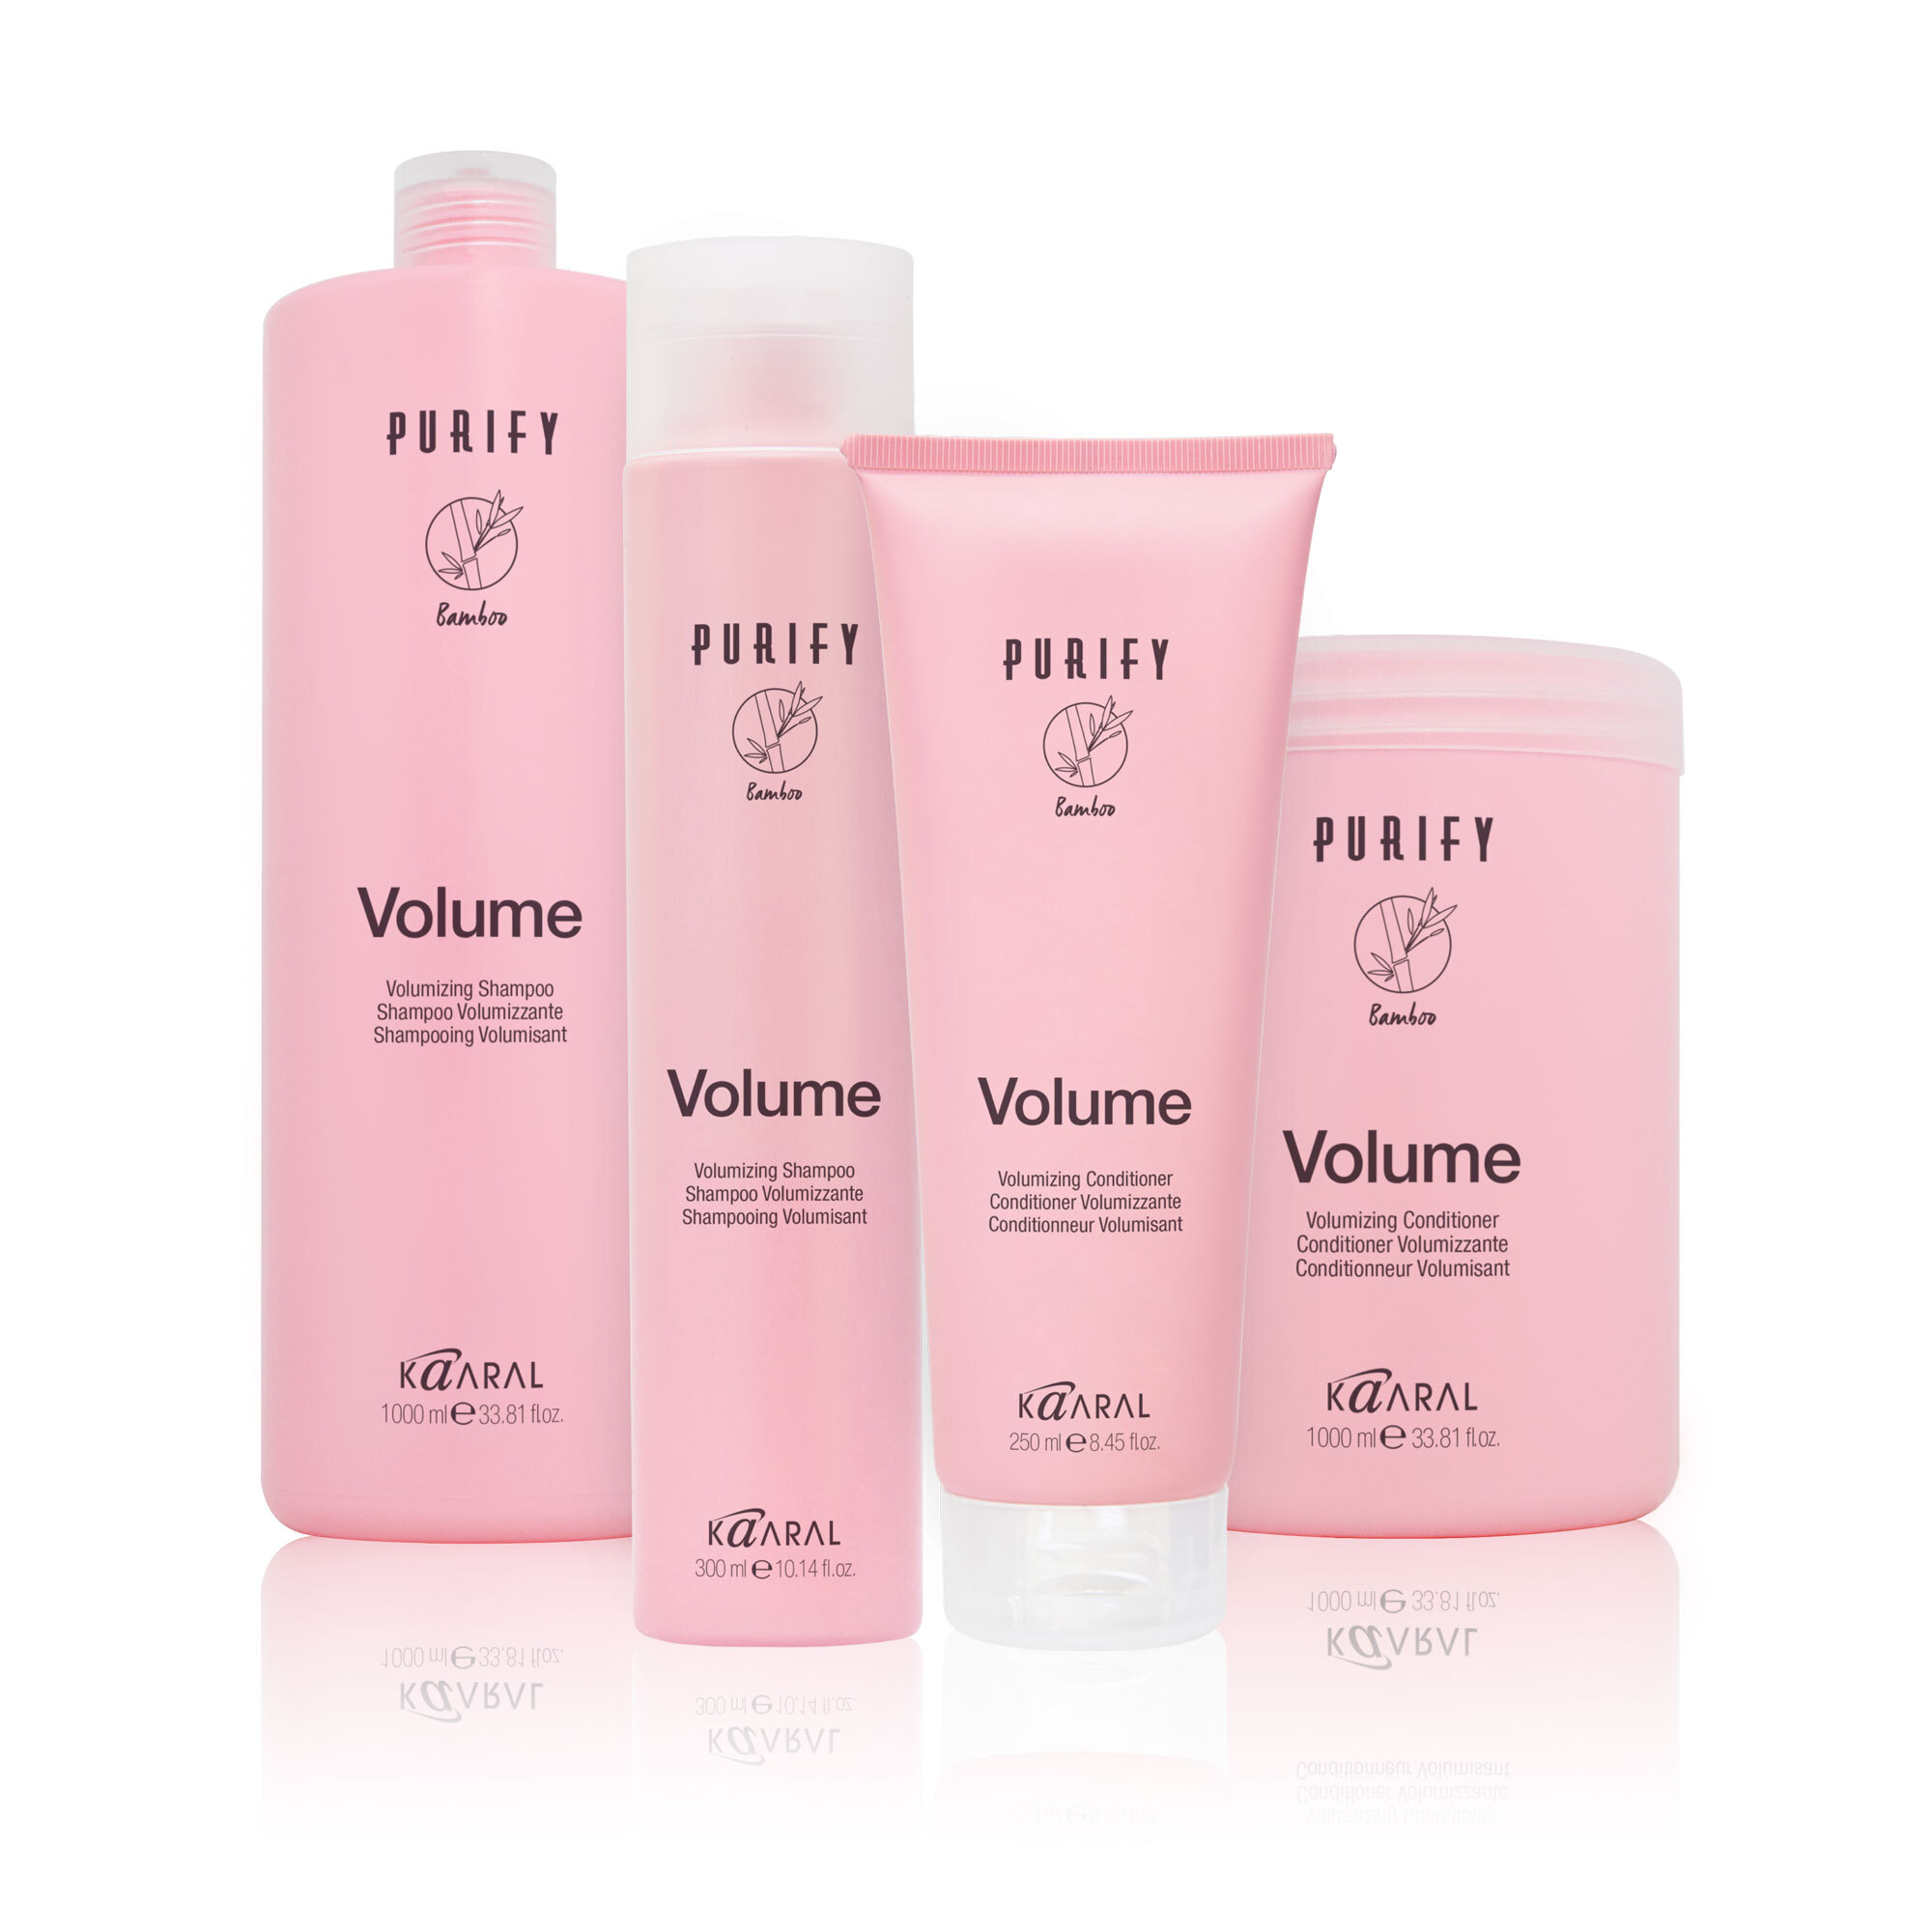 Kaaral Purify Volume Haircare Promotion